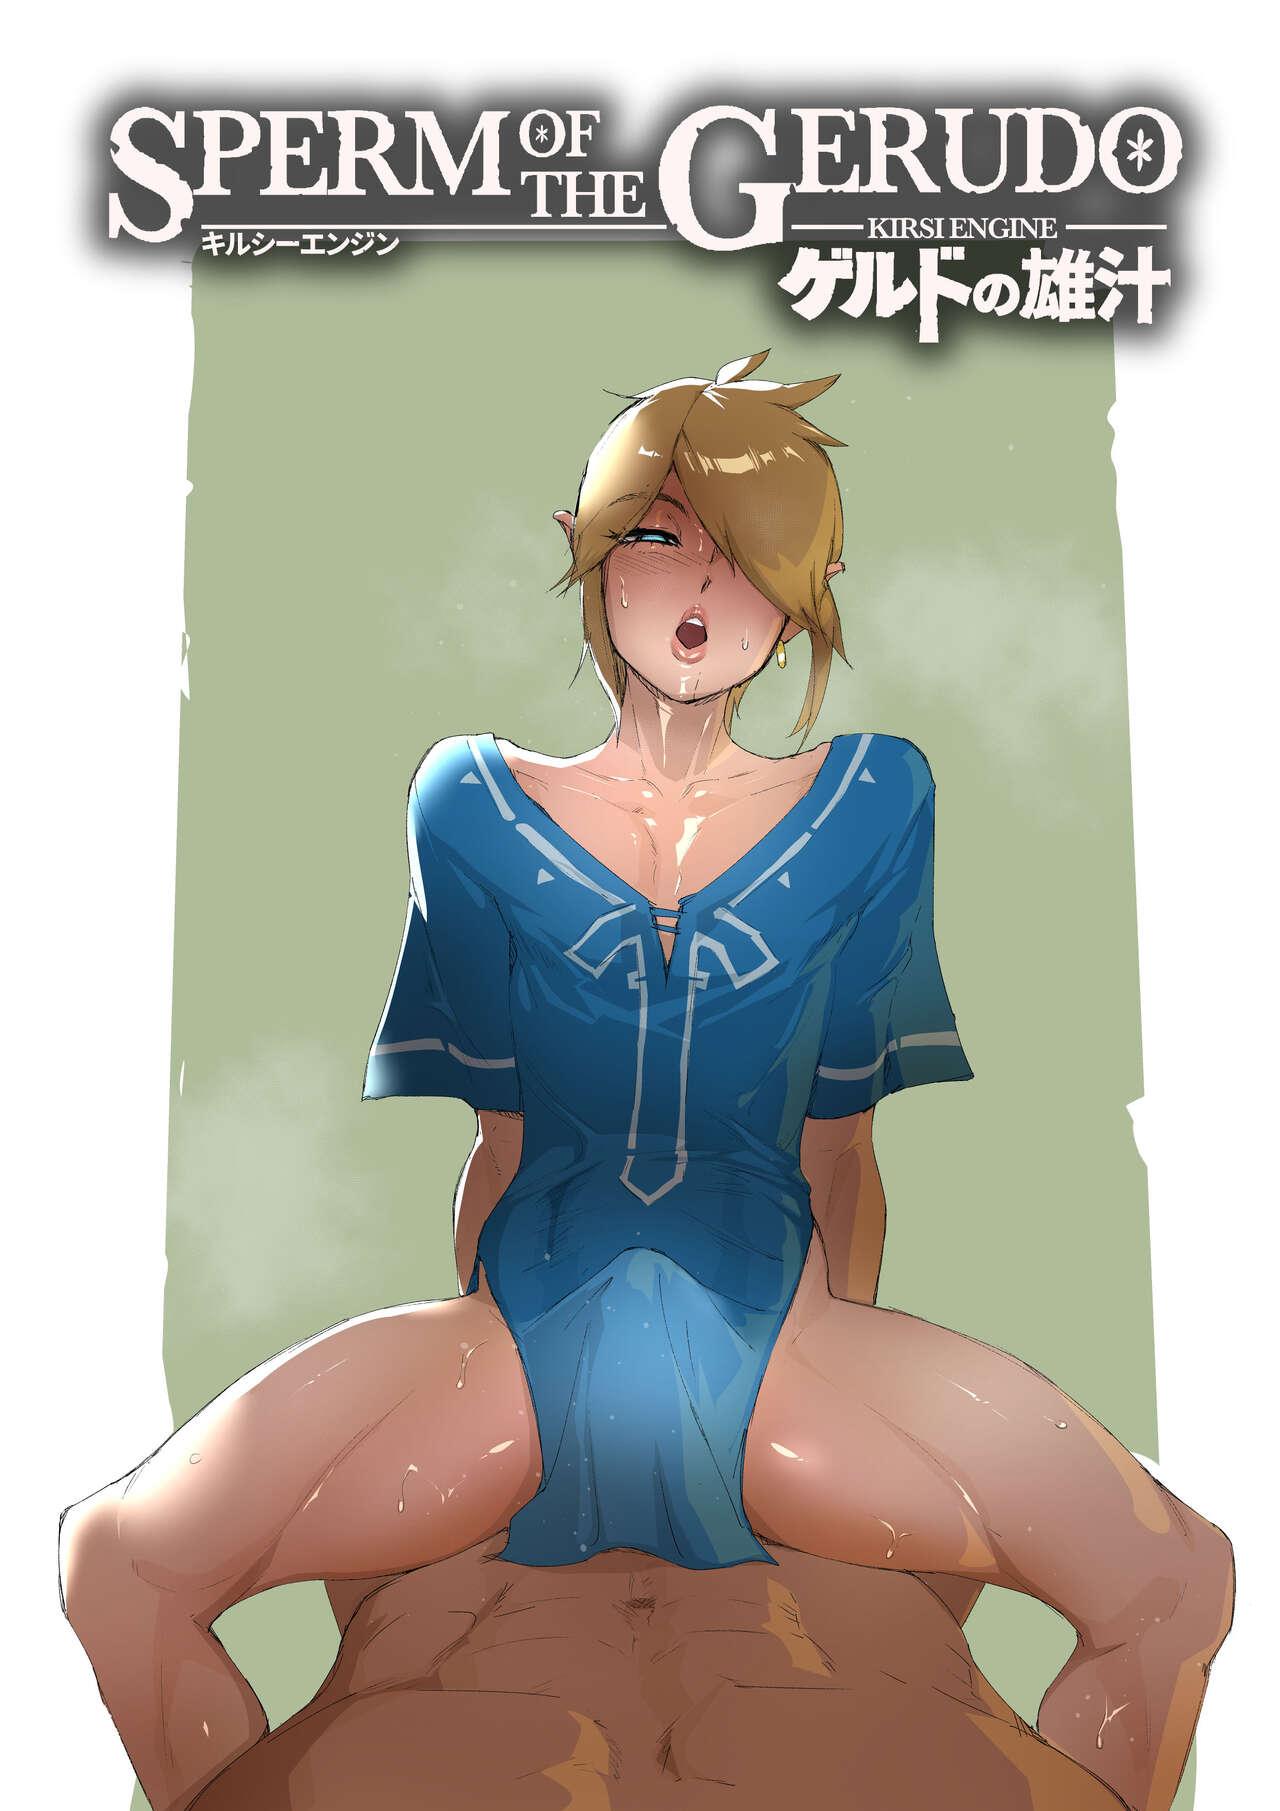 Deflowered Sperm Of The Gerudo - The legend of zelda Assfucked - Picture 1